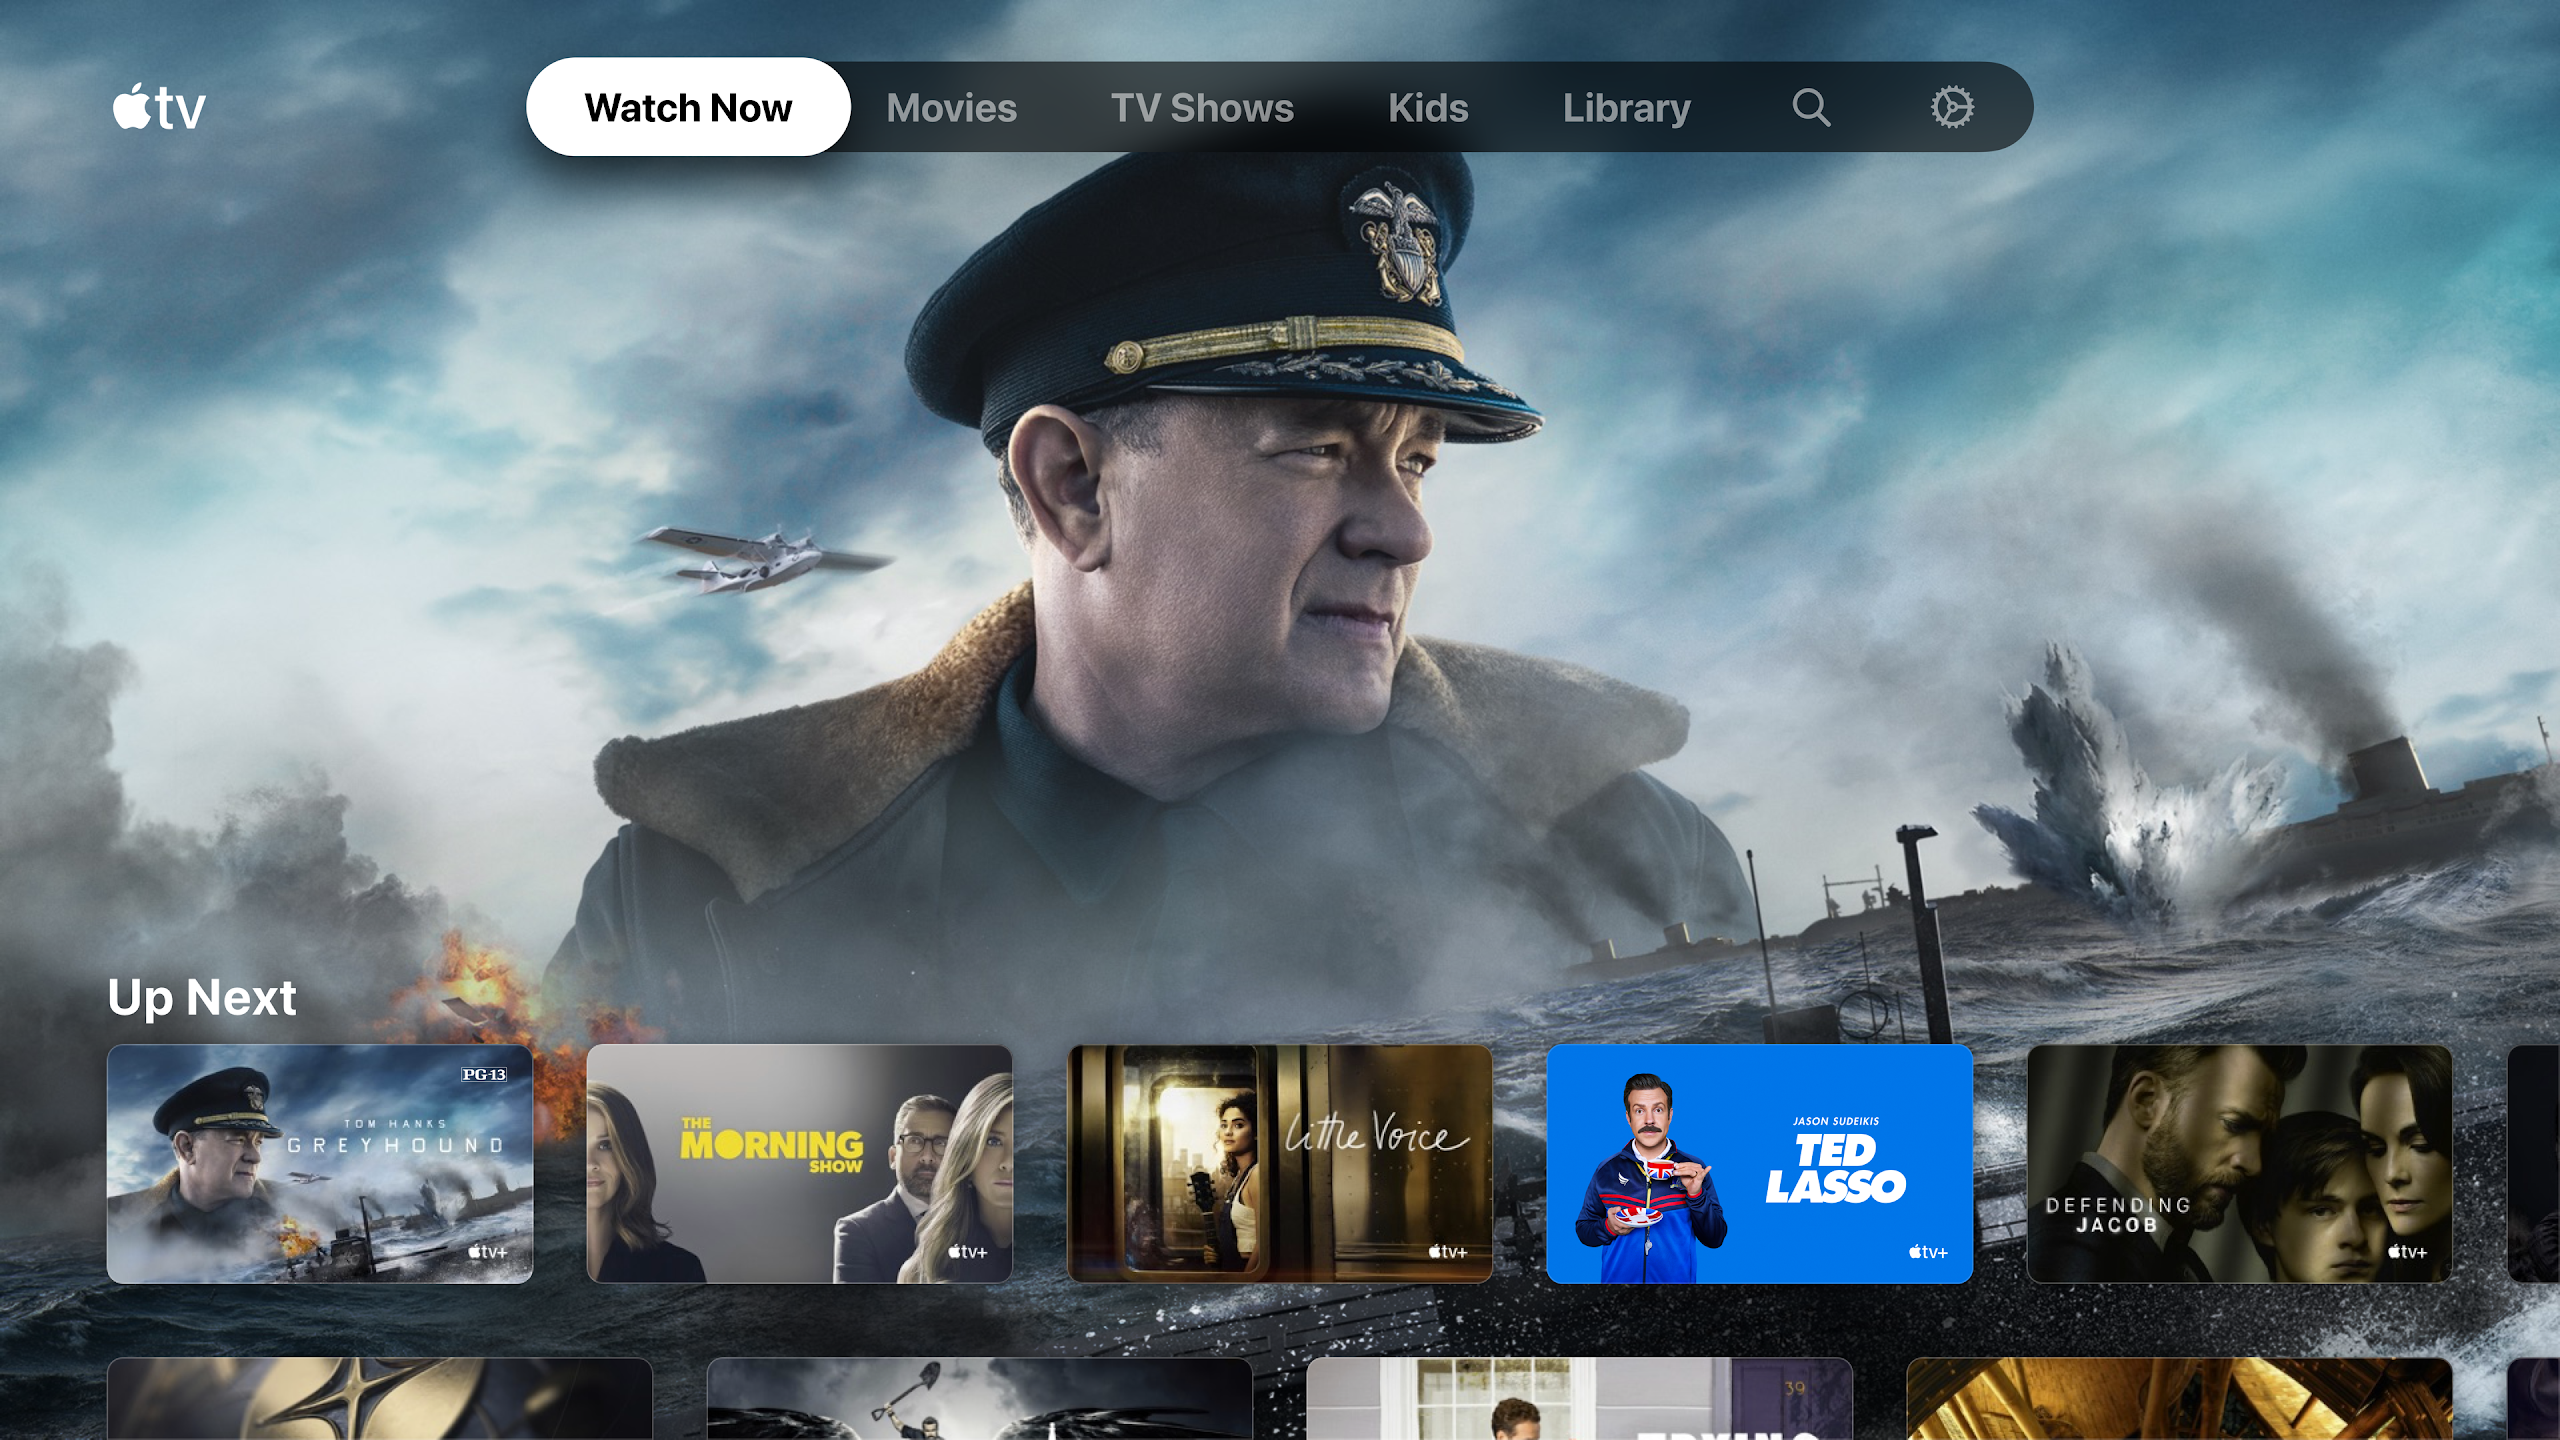 The Apple TV home screen showing movies available to watch